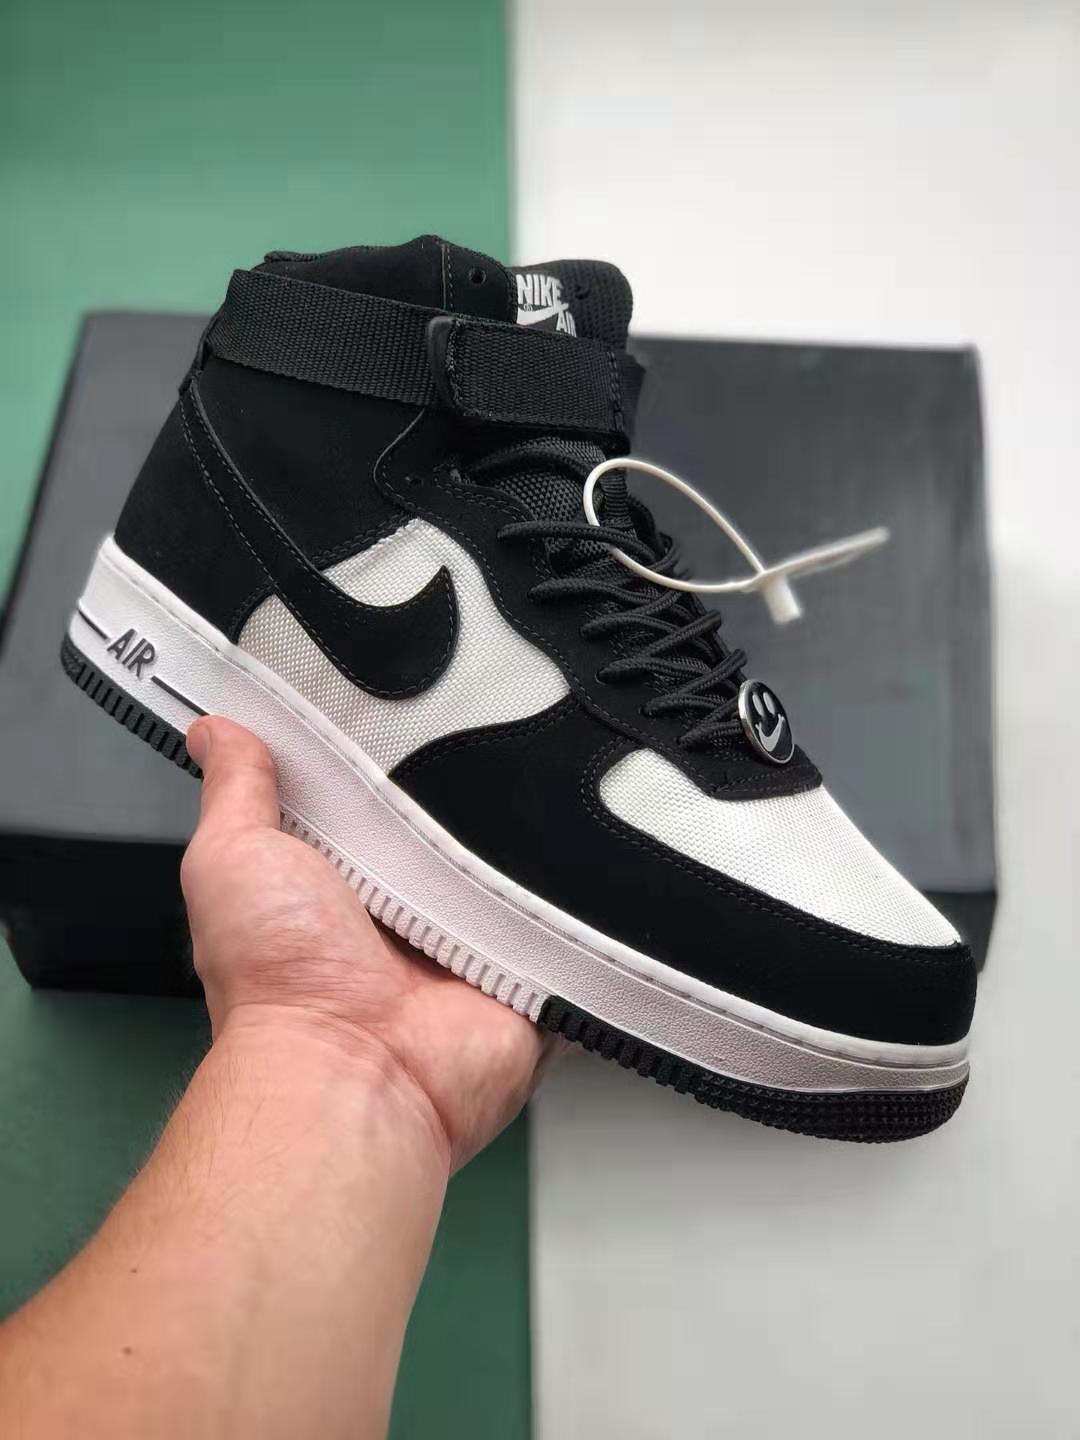 Nike Air Force 1 High 07 LV8 Have a Nike Day Black White CI2306-302 - Shop Now!